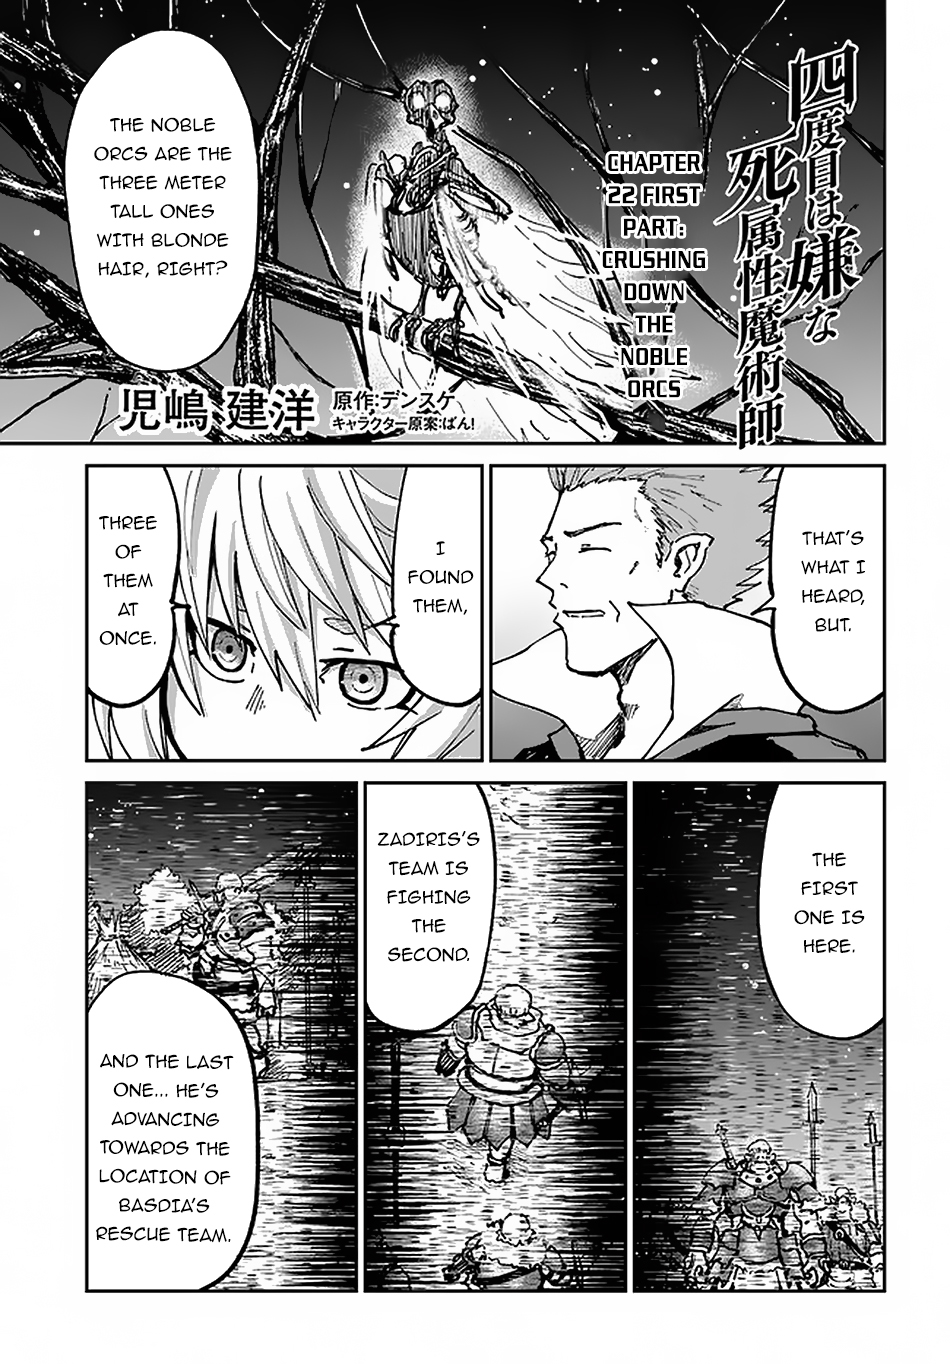 Yondome Wa Iya Na Shizokusei Majutsushi Vol.5 Chapter 22: First And Second Part: Crushing Down The Noble Orcs - Picture 2